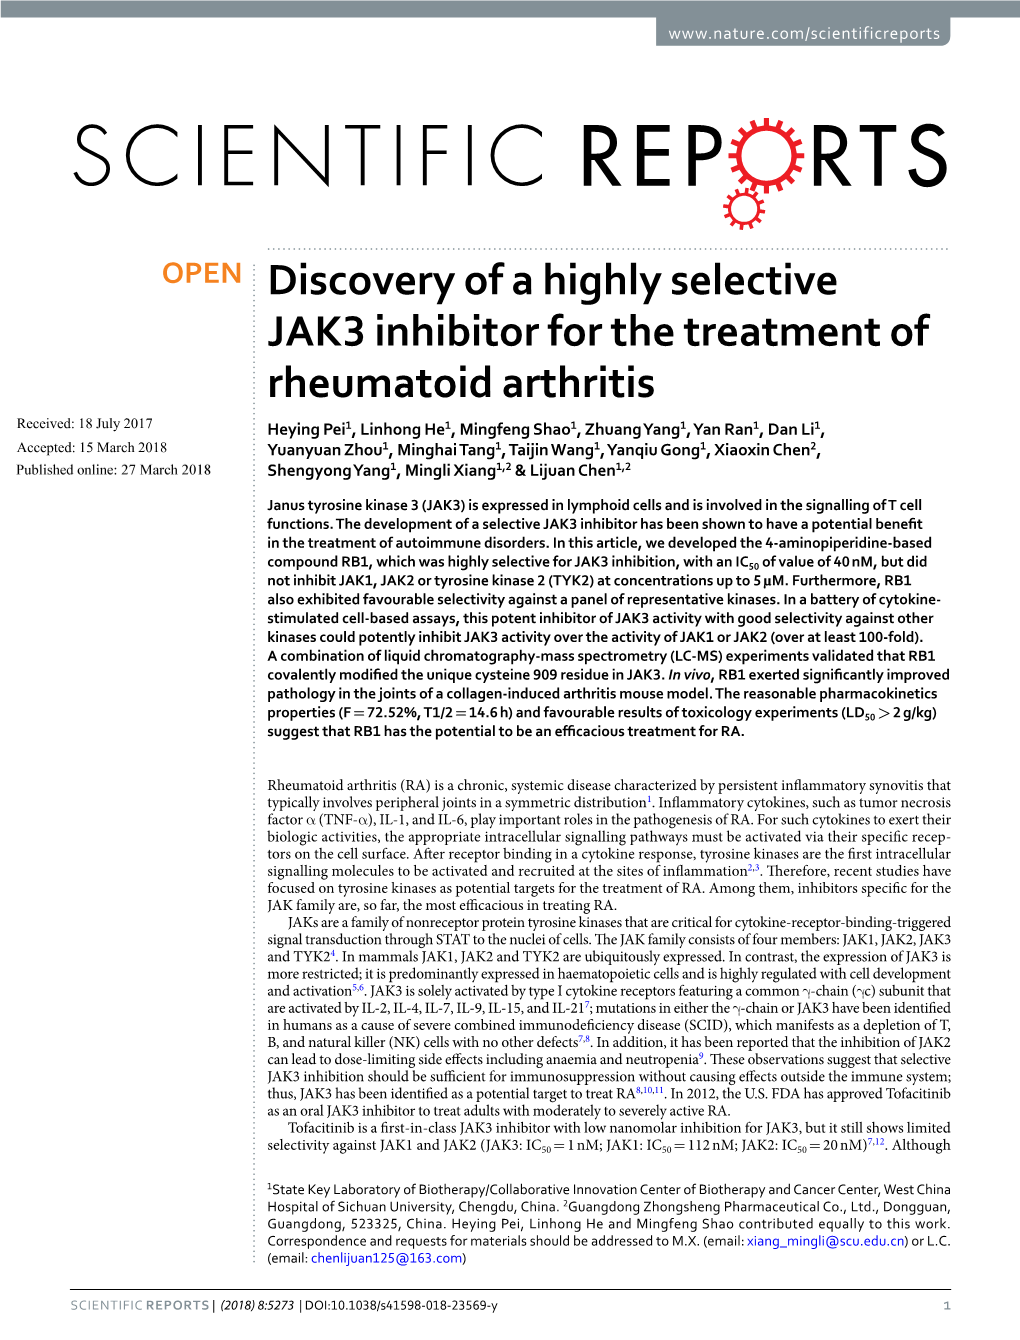 Discovery of a Highly Selective JAK3 Inhibitor for the Treatment Of